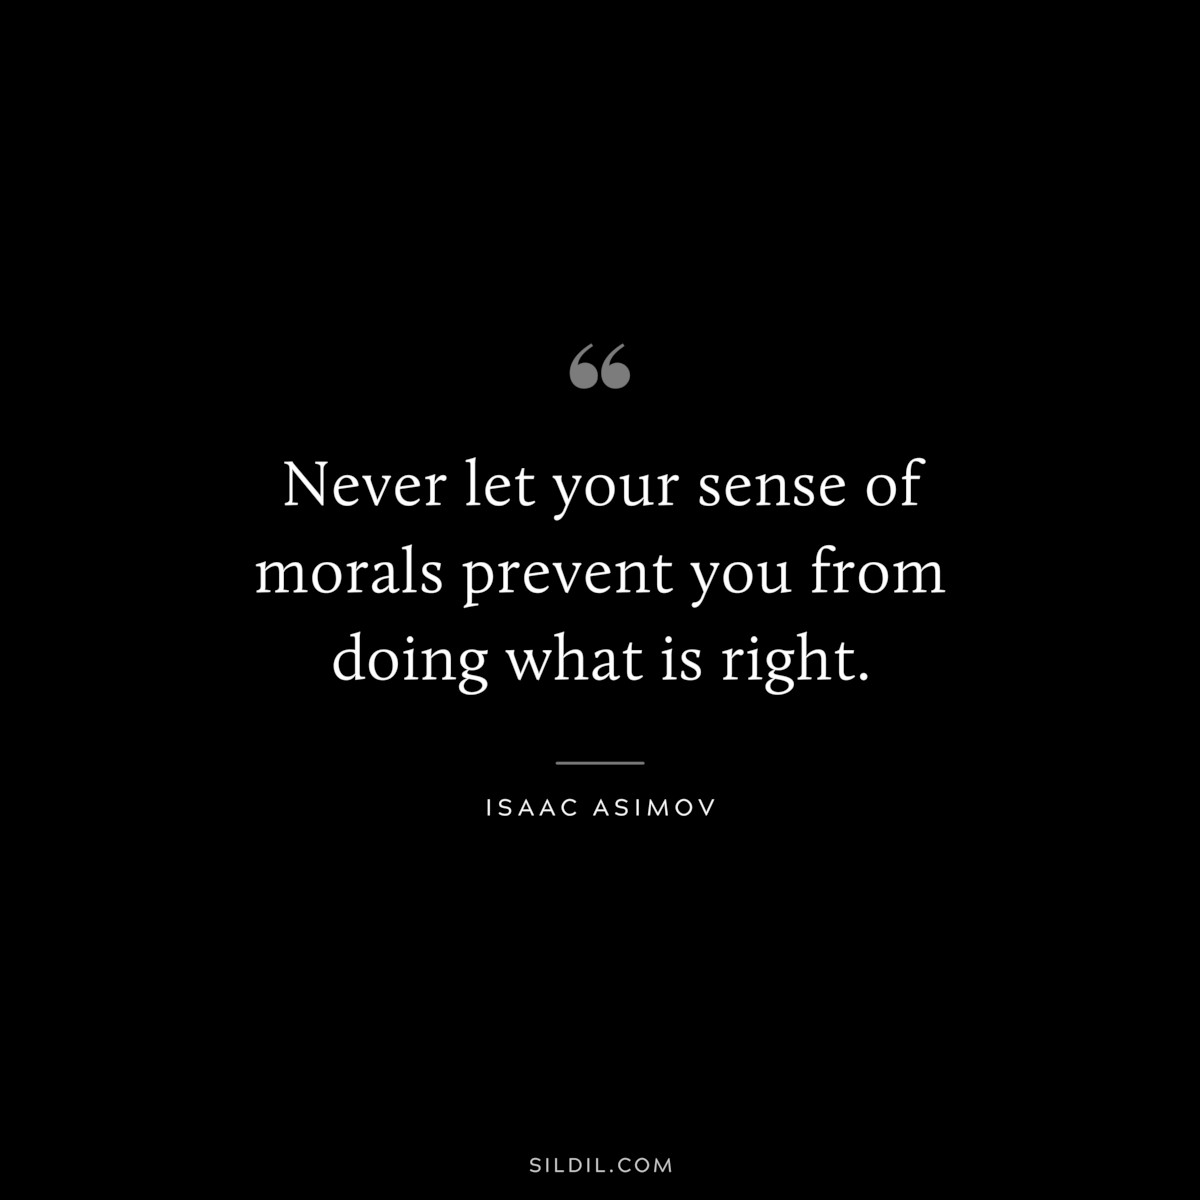 Never let your sense of morals prevent you from doing what is right. ― Isaac Asimov